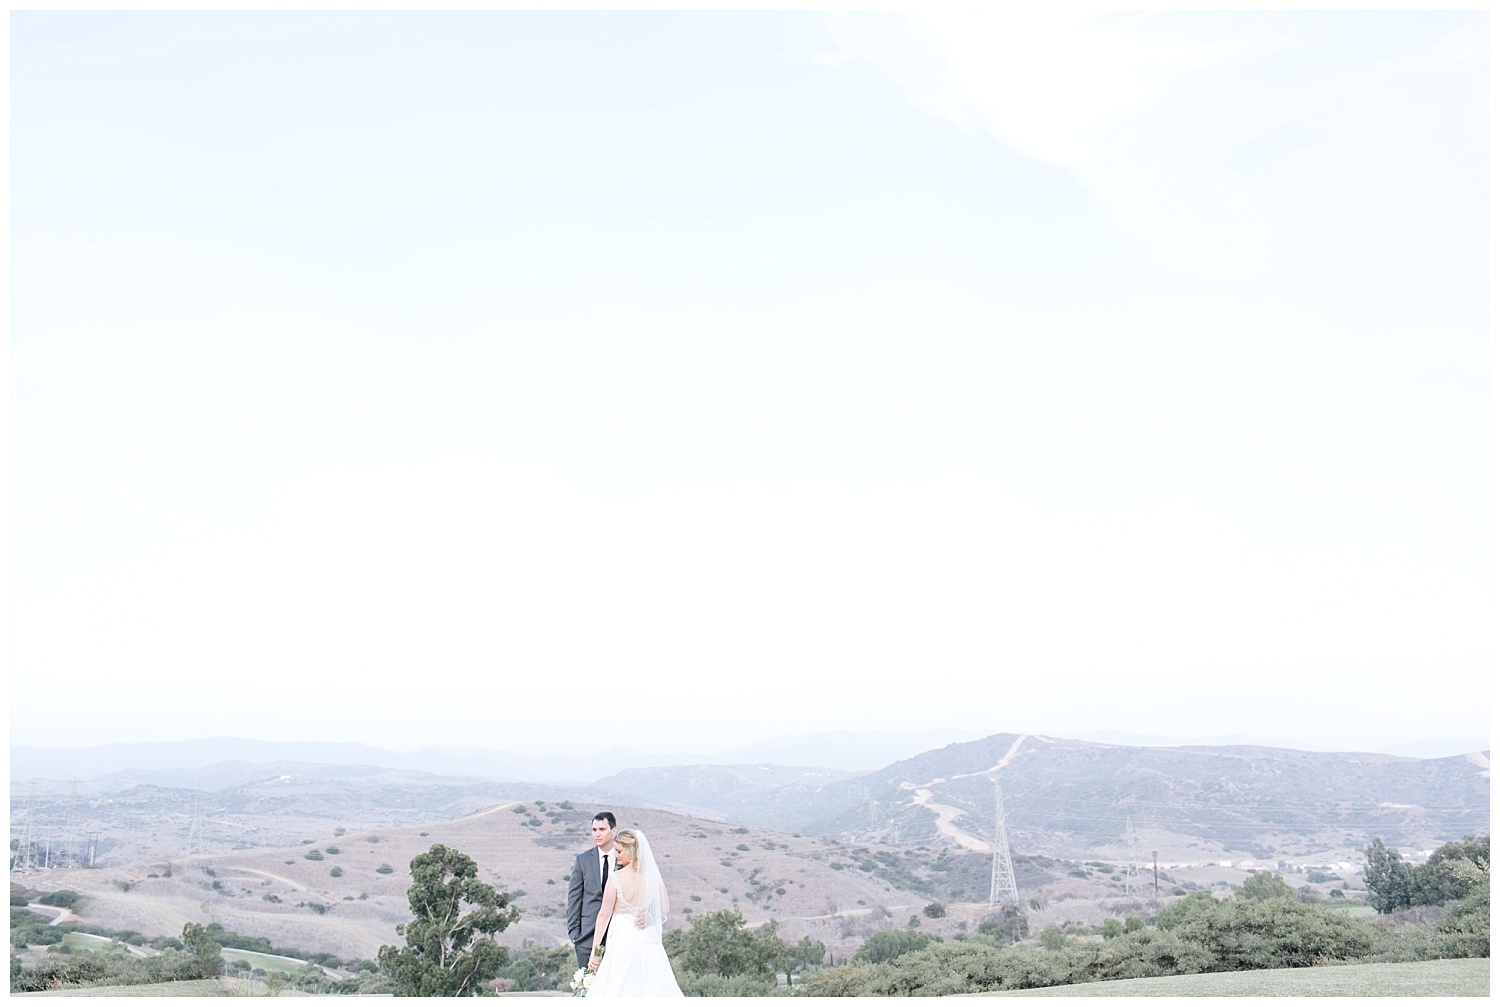 catherine + tim - bella collina golf course - san clemente california - wedding party - bride and groom couples portraits-0244